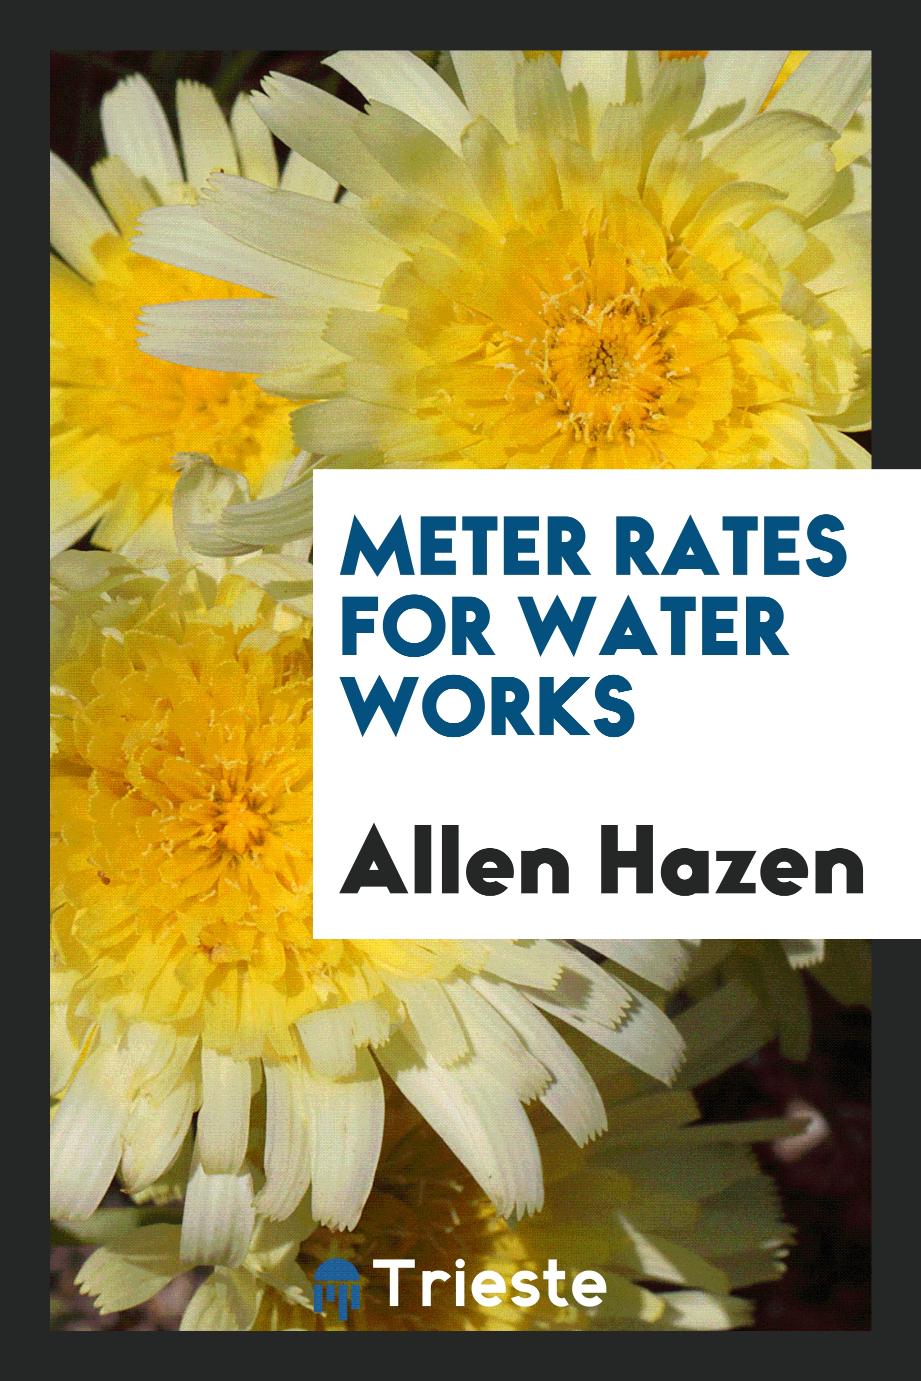 Meter rates for water works